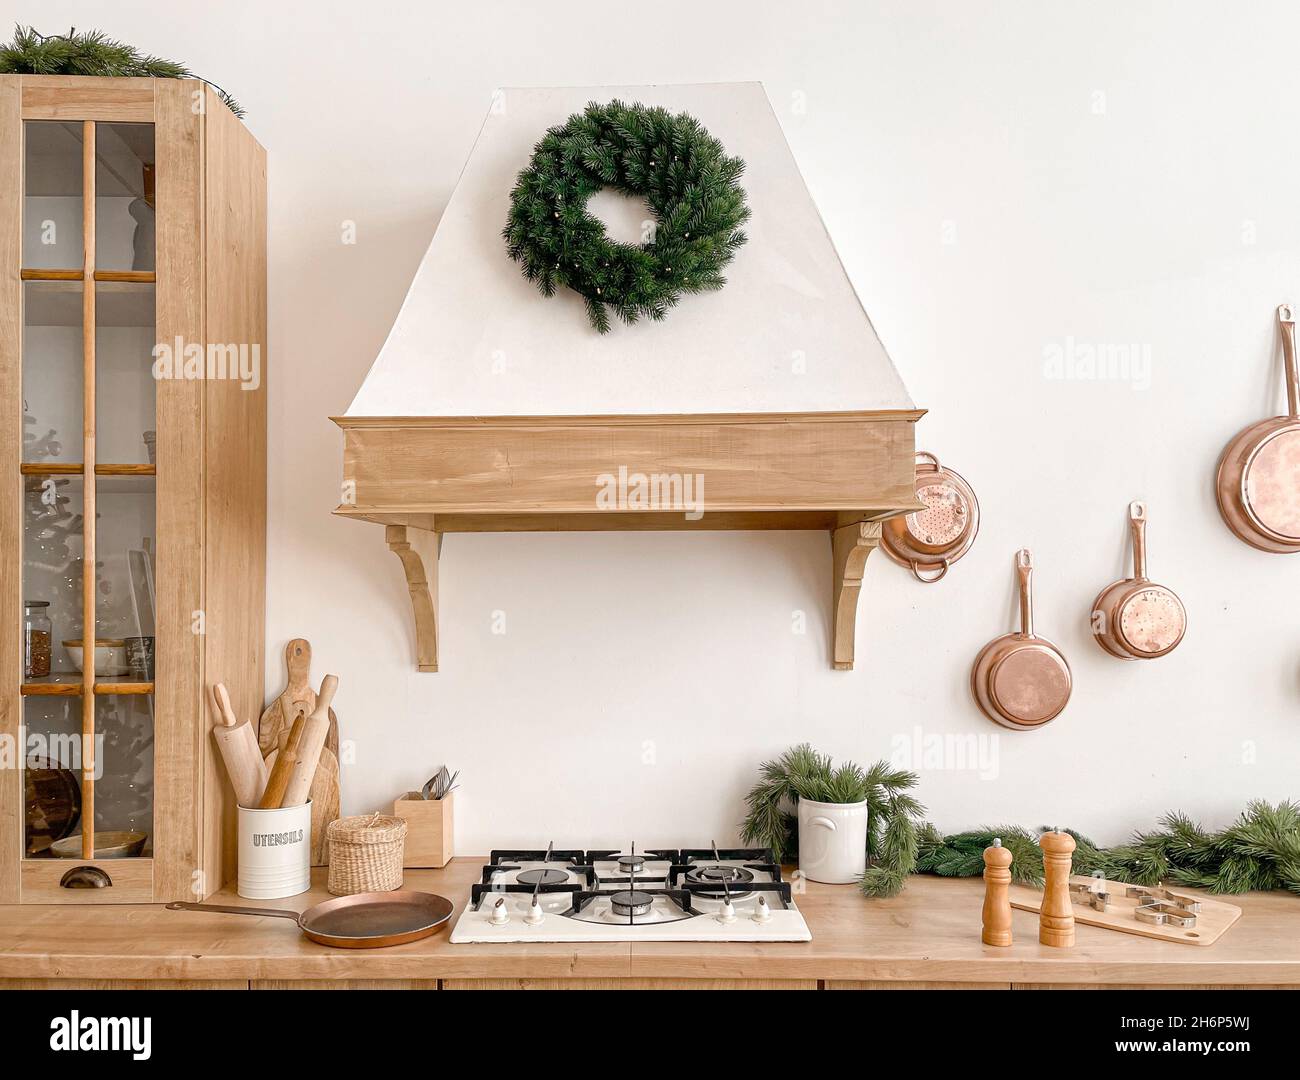 Festive Christmas Decorated Kitchen Counter With Stove 2H6P5WJ 